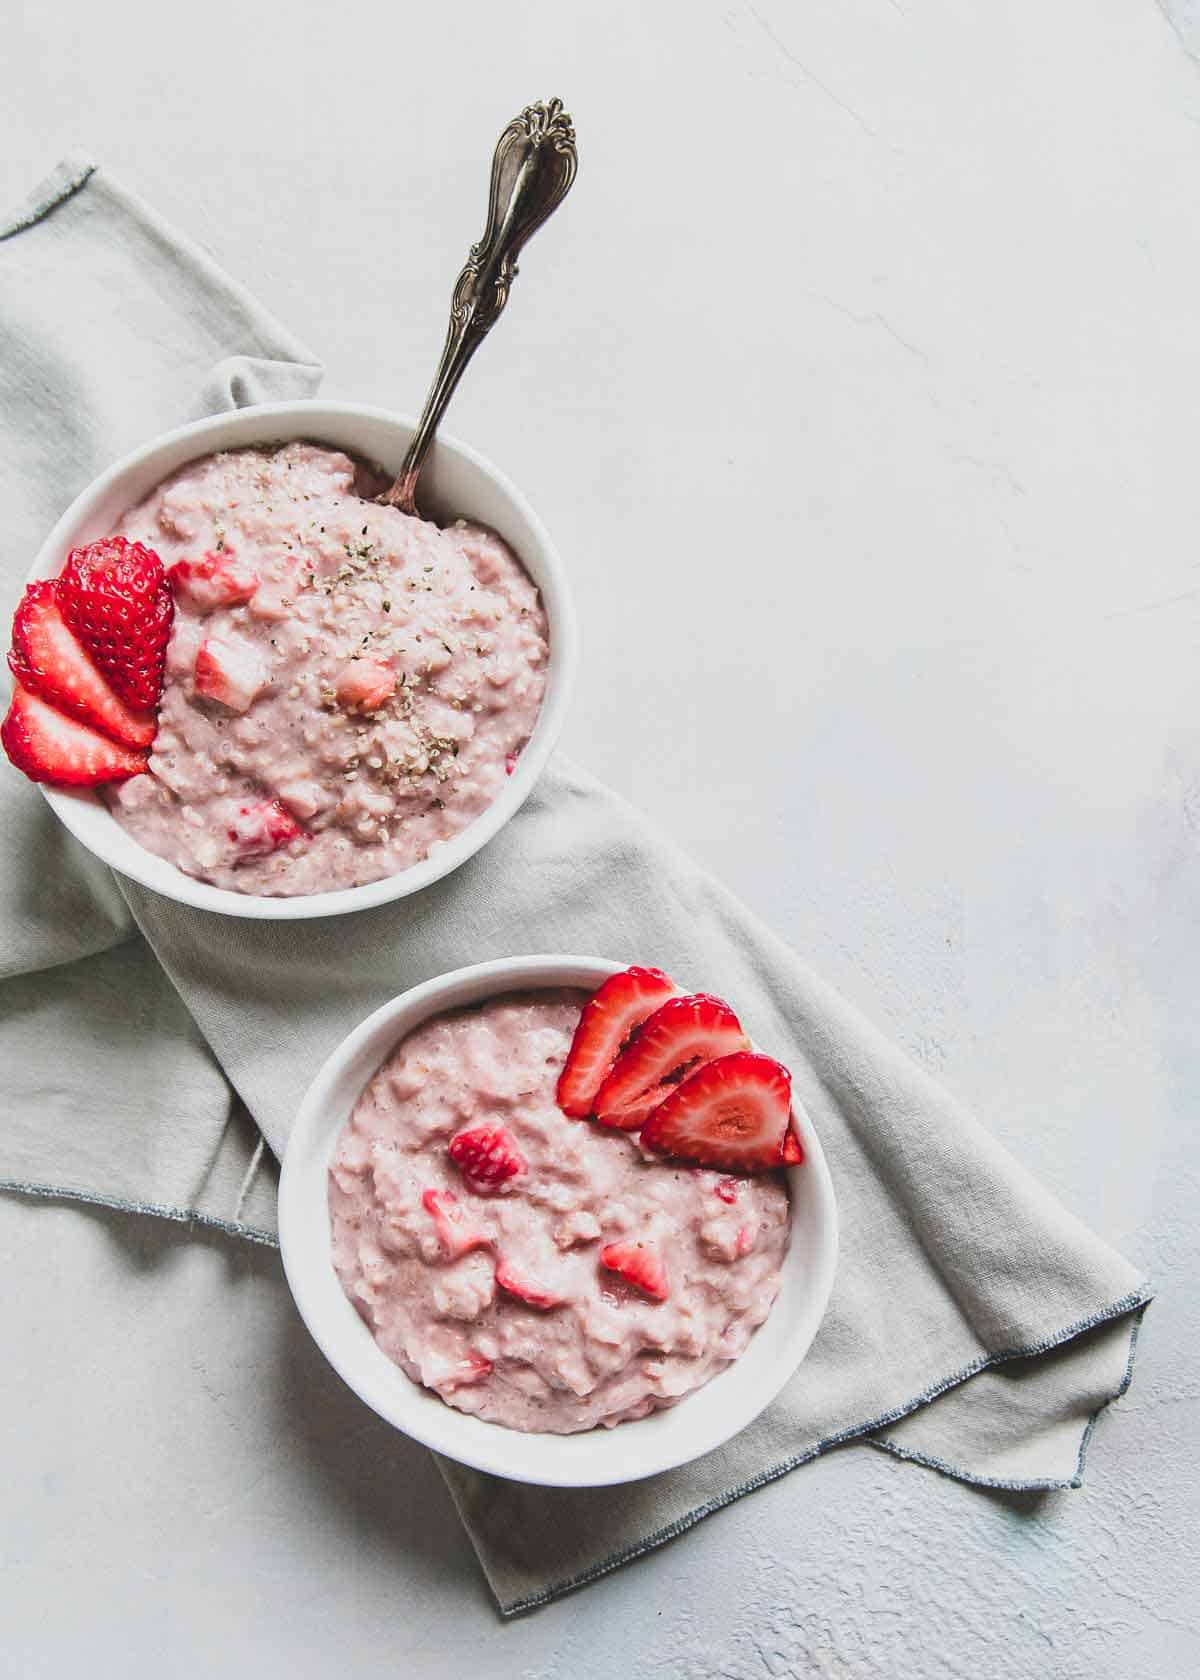 This easy strawberry oatmeal recipe is packed with all-natural strawberry flavor, made on the stove-top and comes out creamy and delicious. A great breakfast to meal-prep for the week!